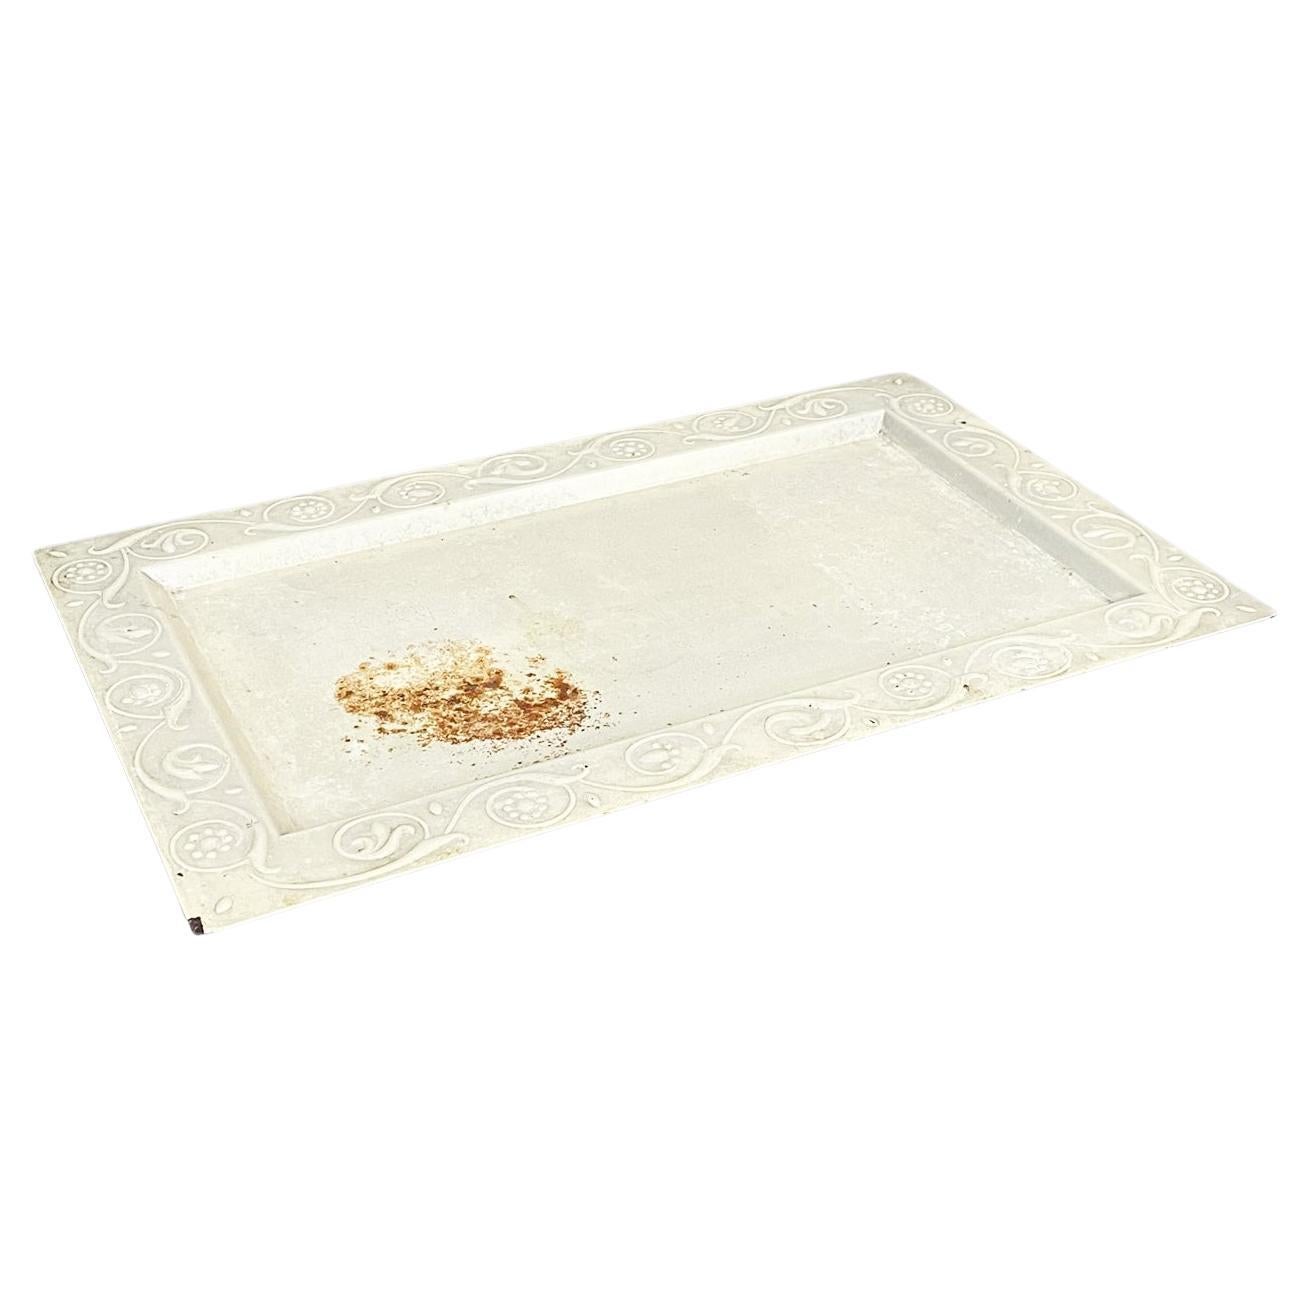 Italian Modern Tray in Beige Iron with Curls Pattern Decorations, 1990s